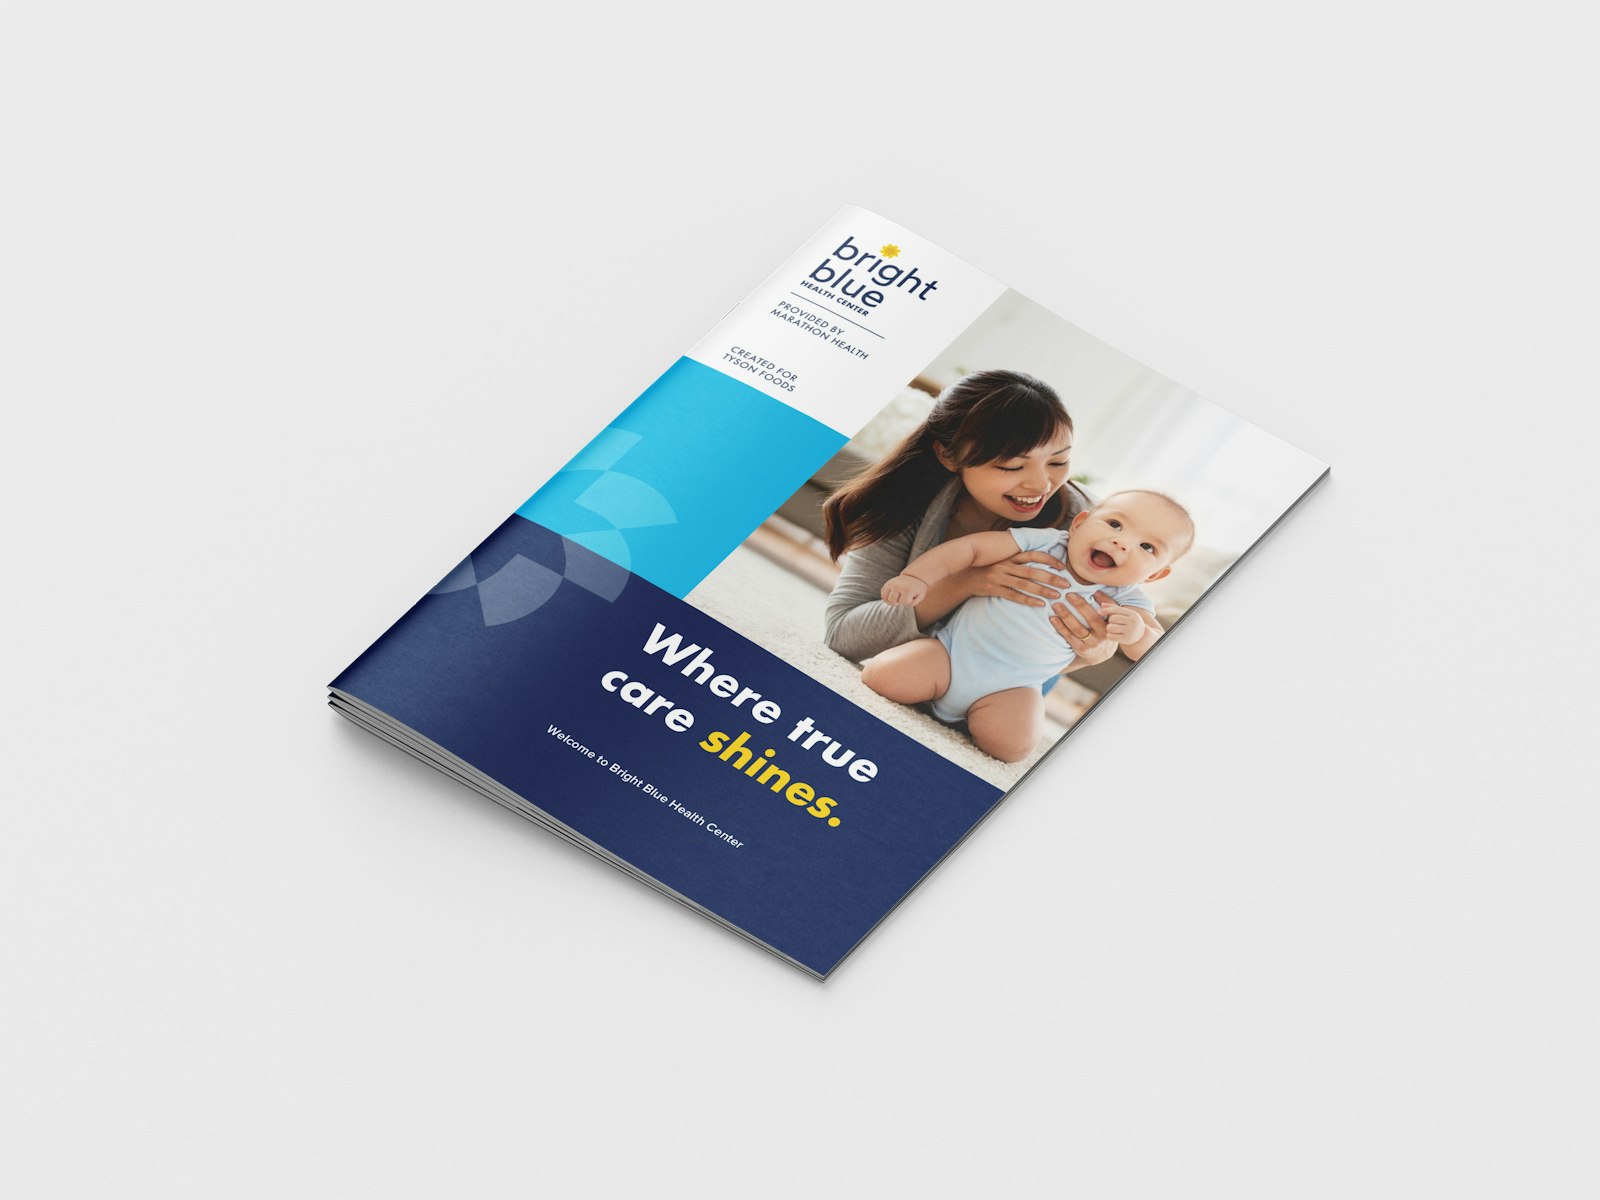 The Bright Blue brand design brochure with photo of happy mom and baby on cover.